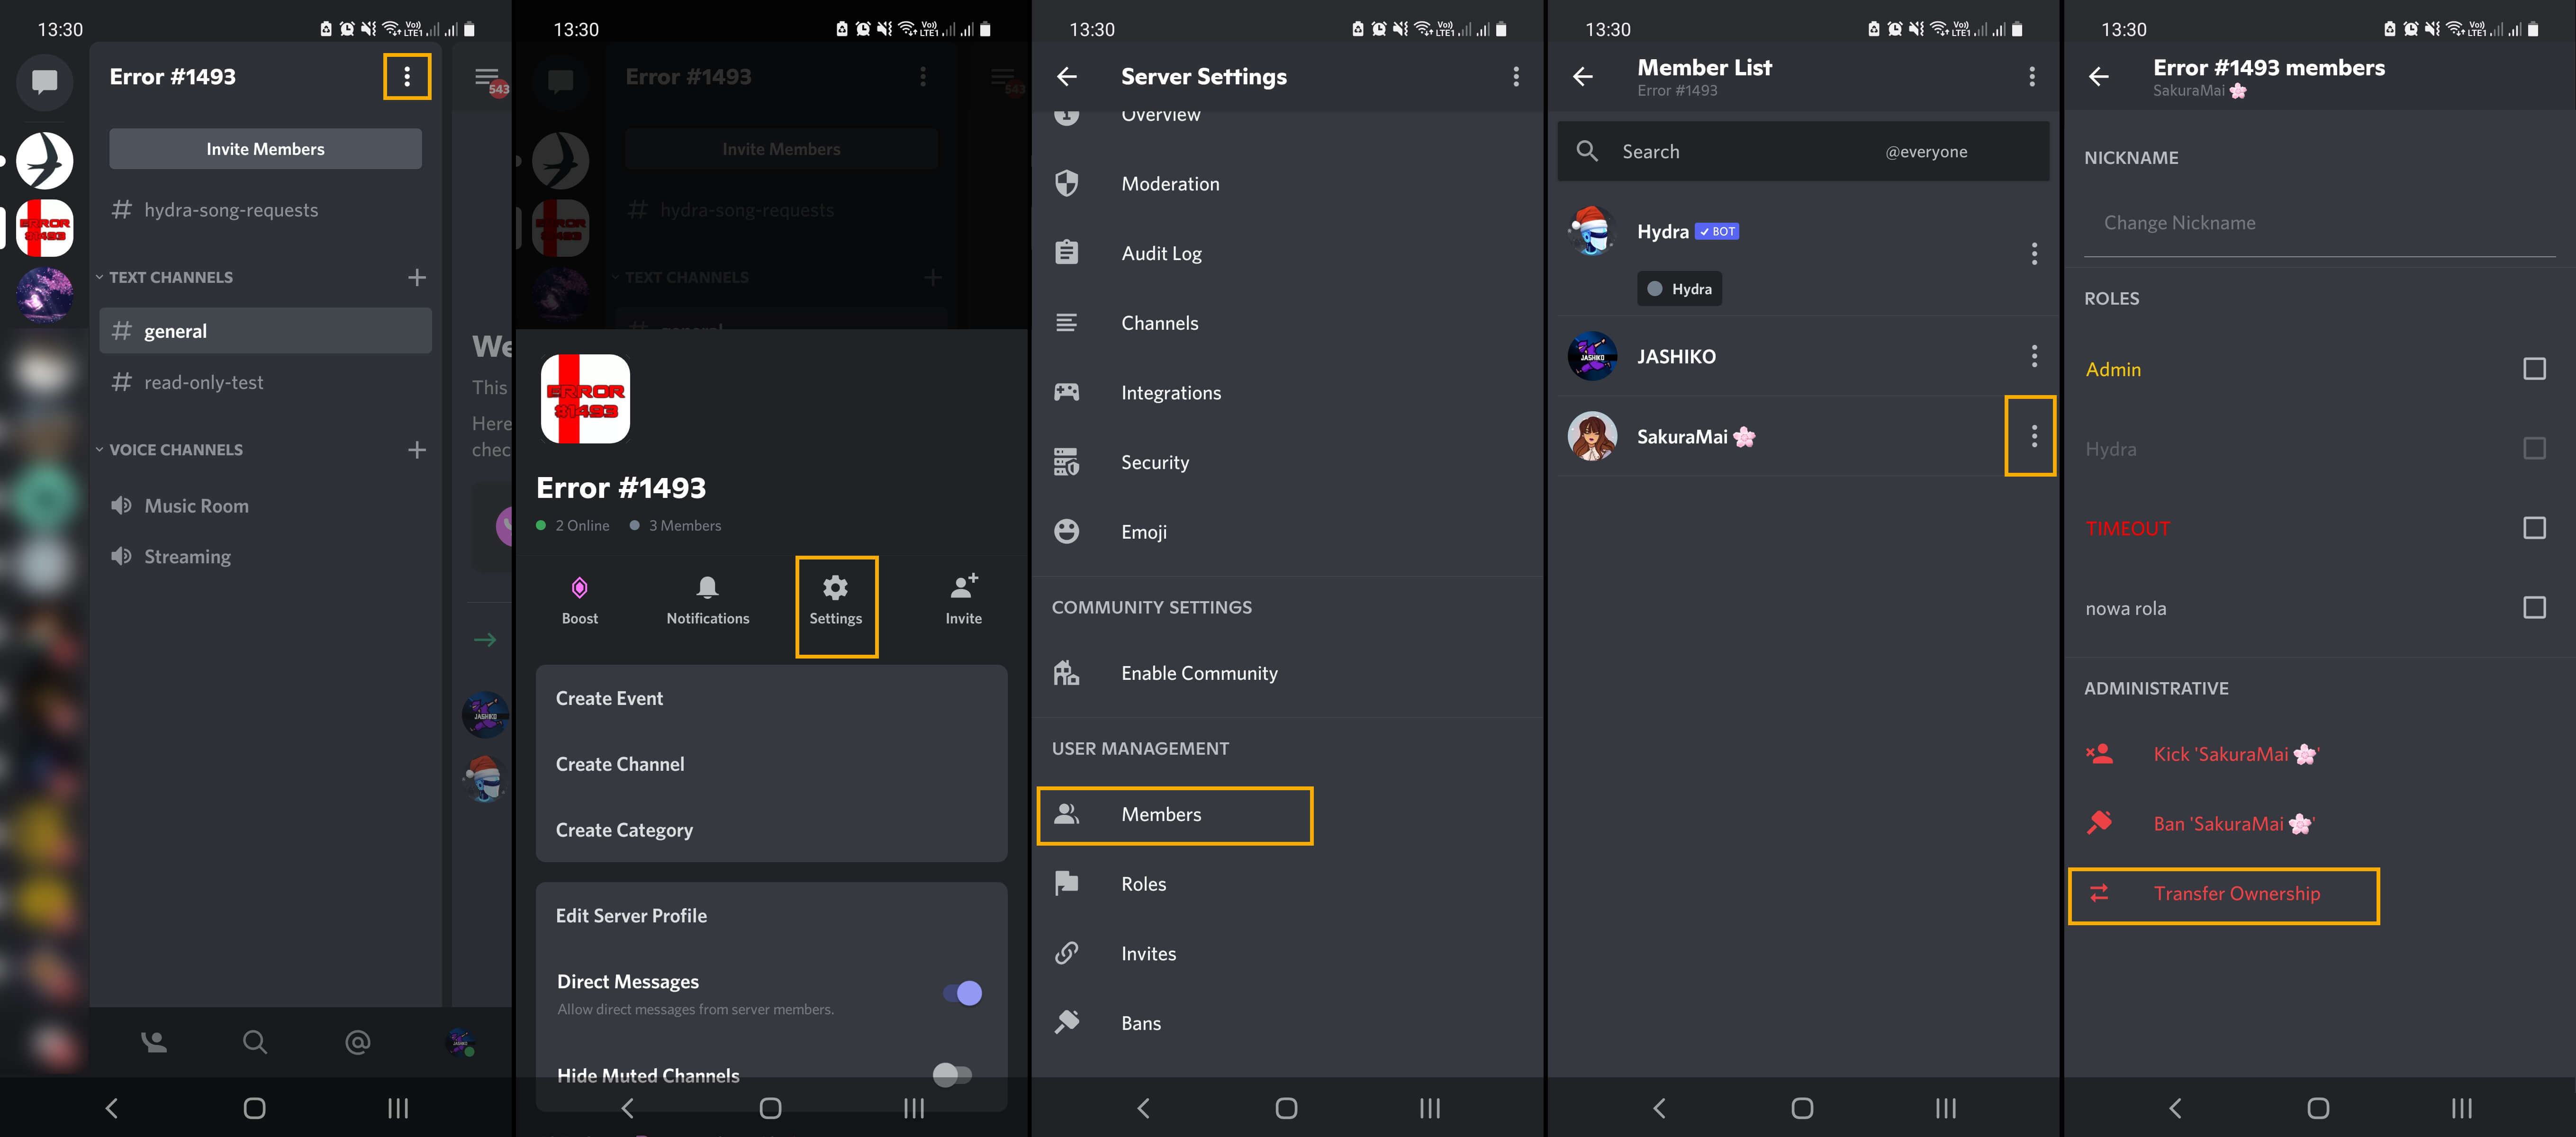 How to transfer discord servers to different users